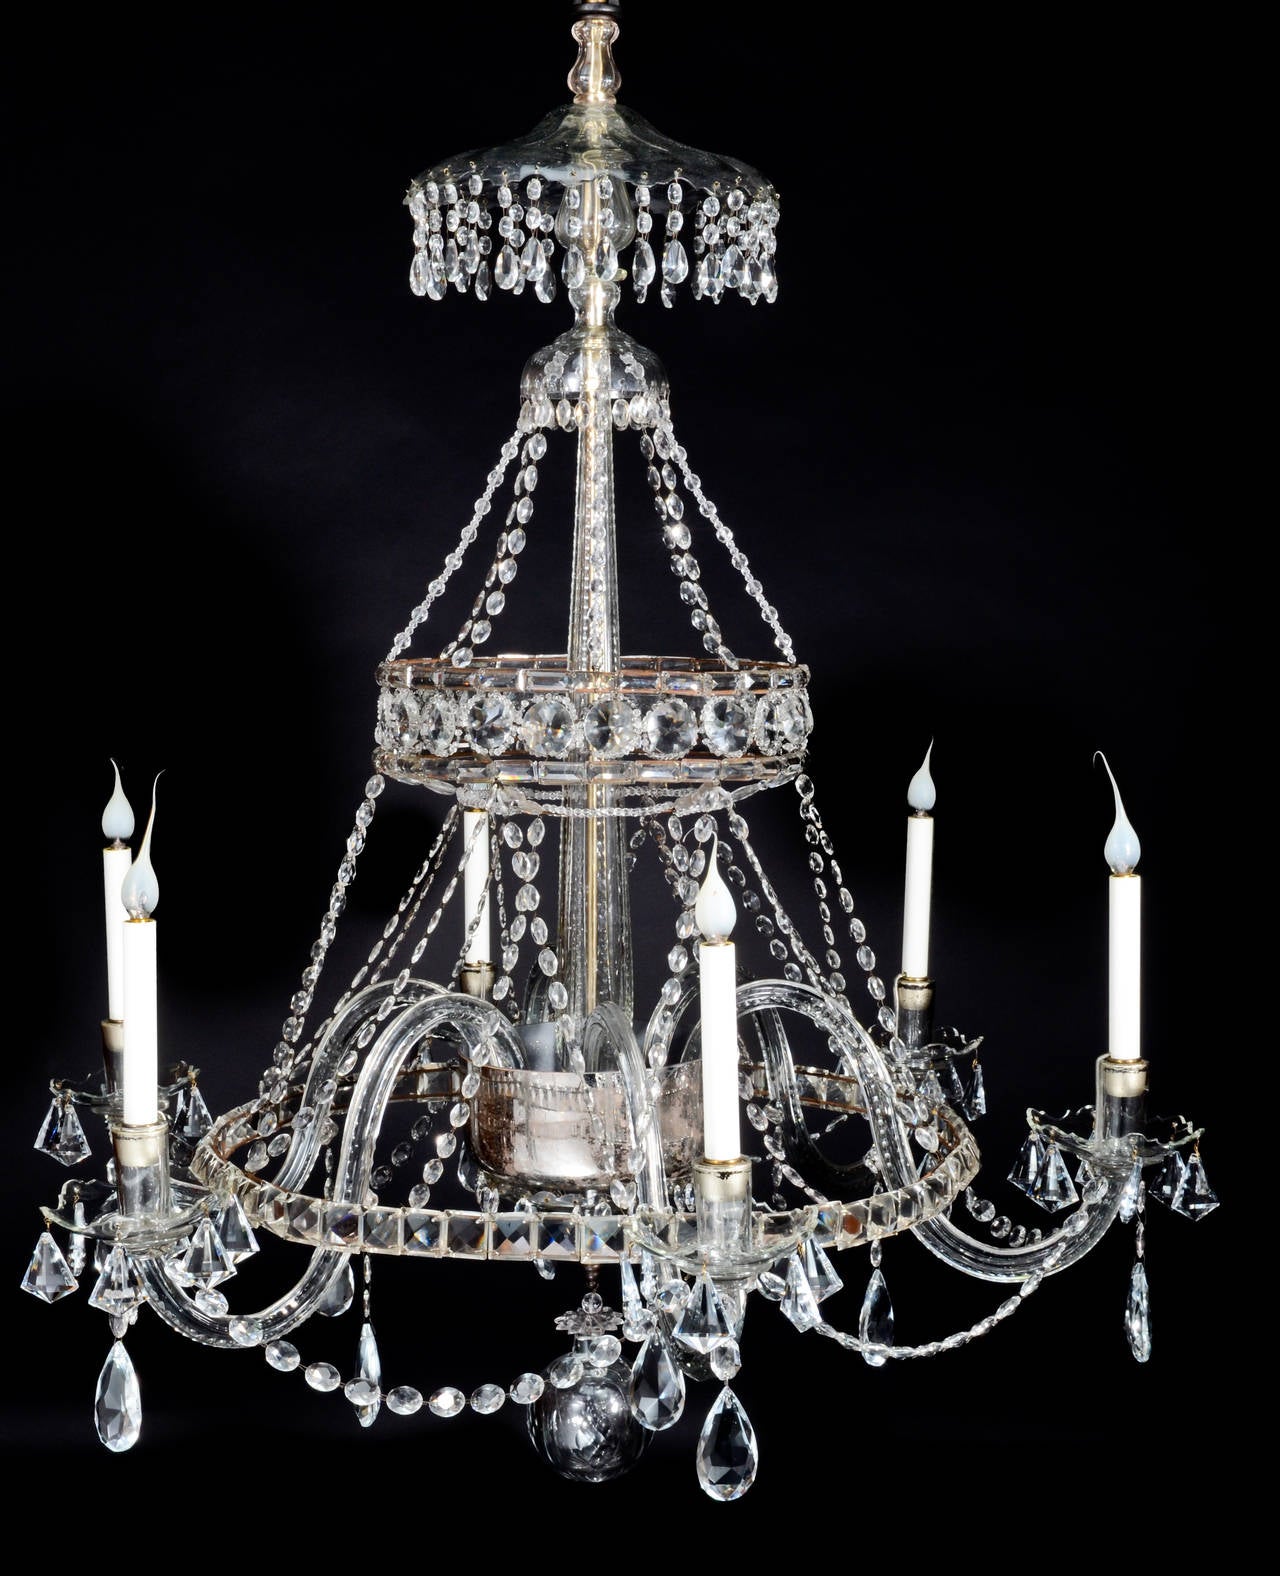 An Unusual Antique Continental Louis XVI Style Cut crystal, mercury glass & copper multi light chandelier embellished with cut crystal arms, prisms, chains & finally adorned with a round mercury glass central dish.